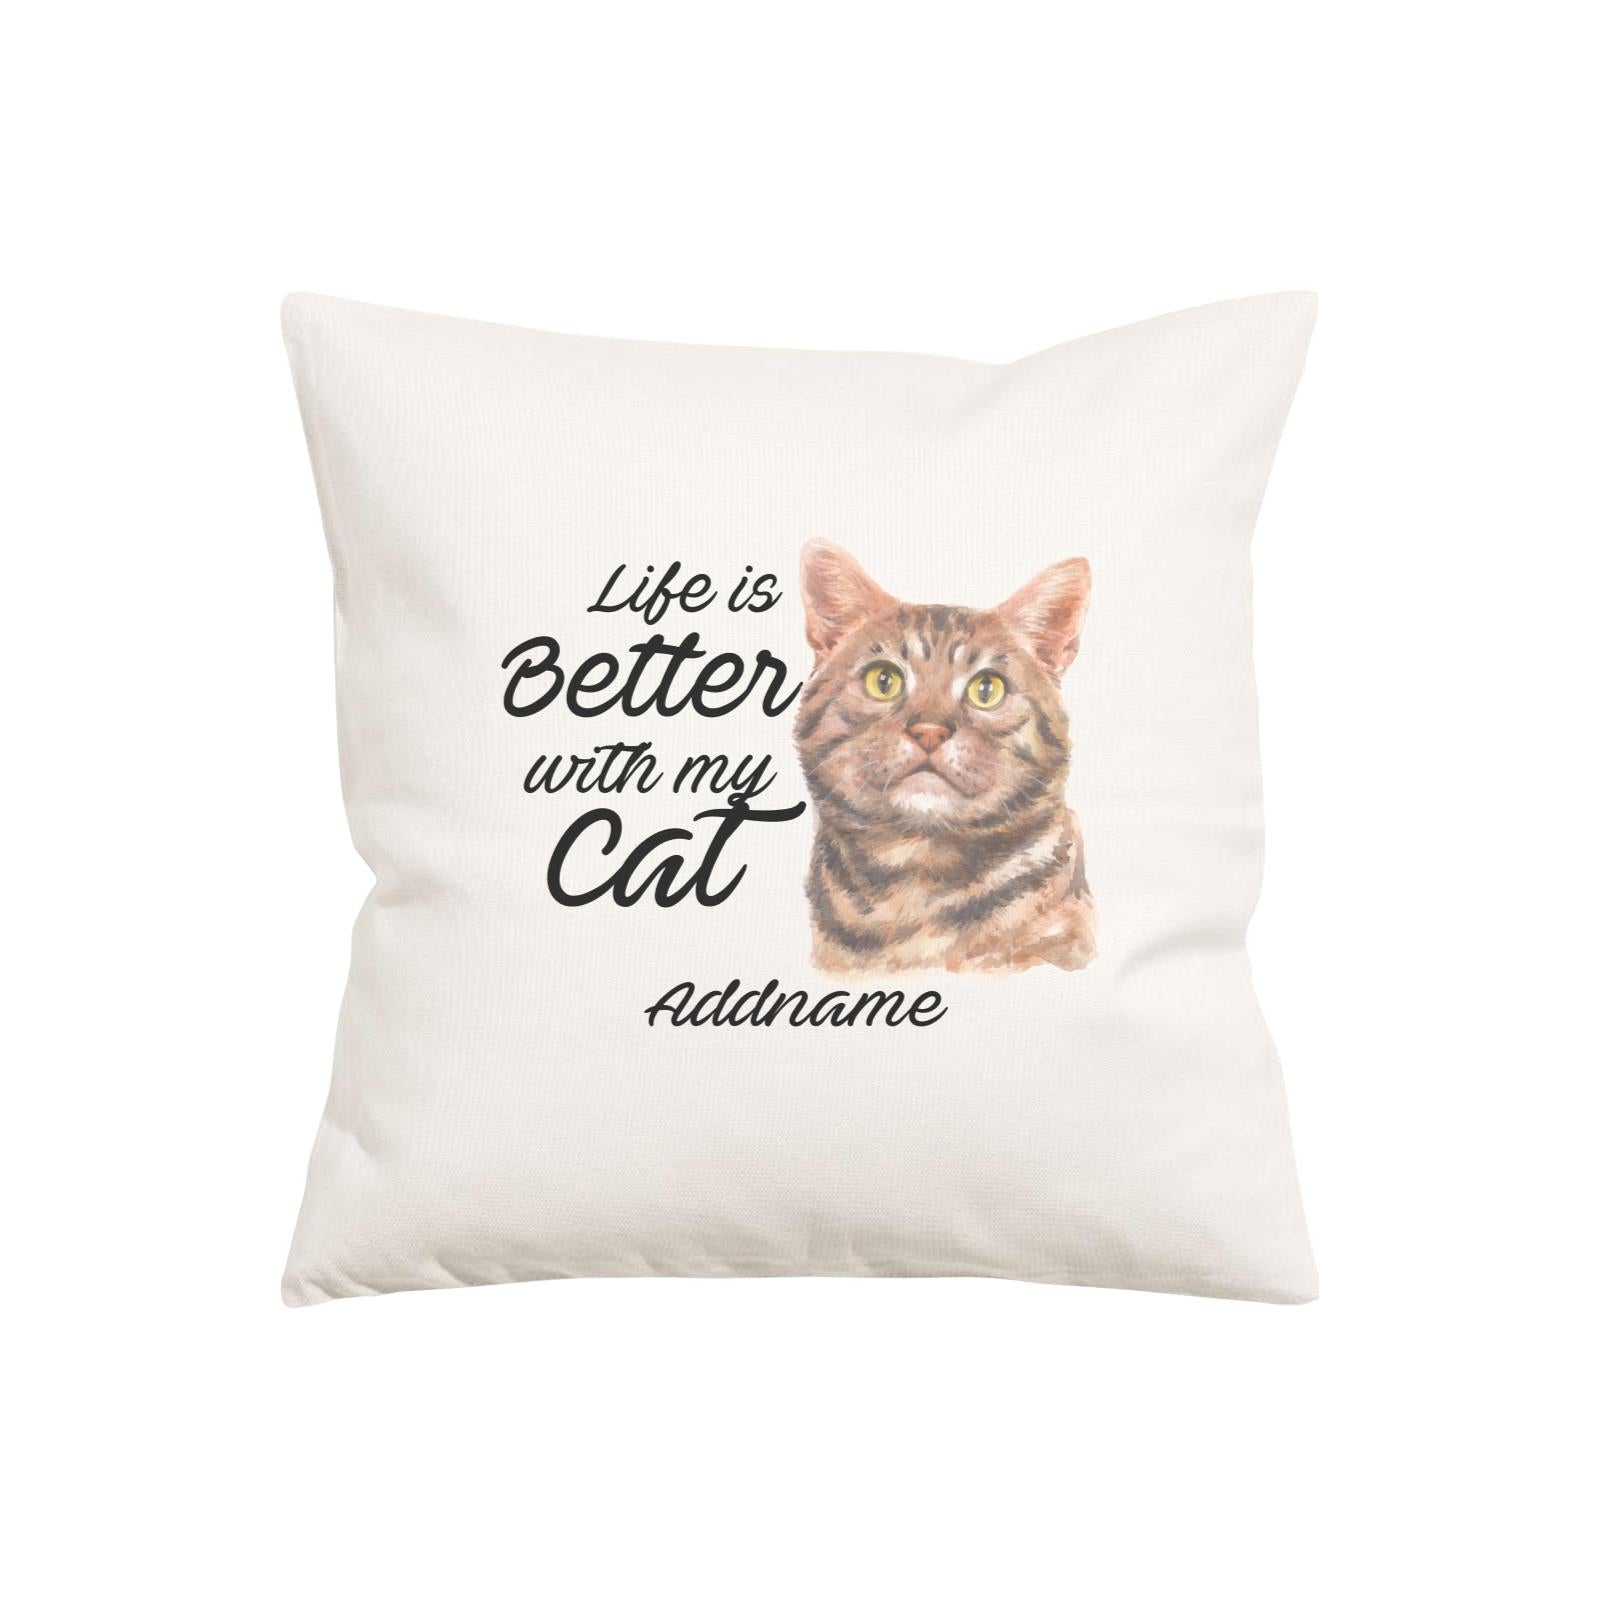 Watercolor Life is Better With My Cat Brown American Shorthair Cat Addname Pillow Cushion